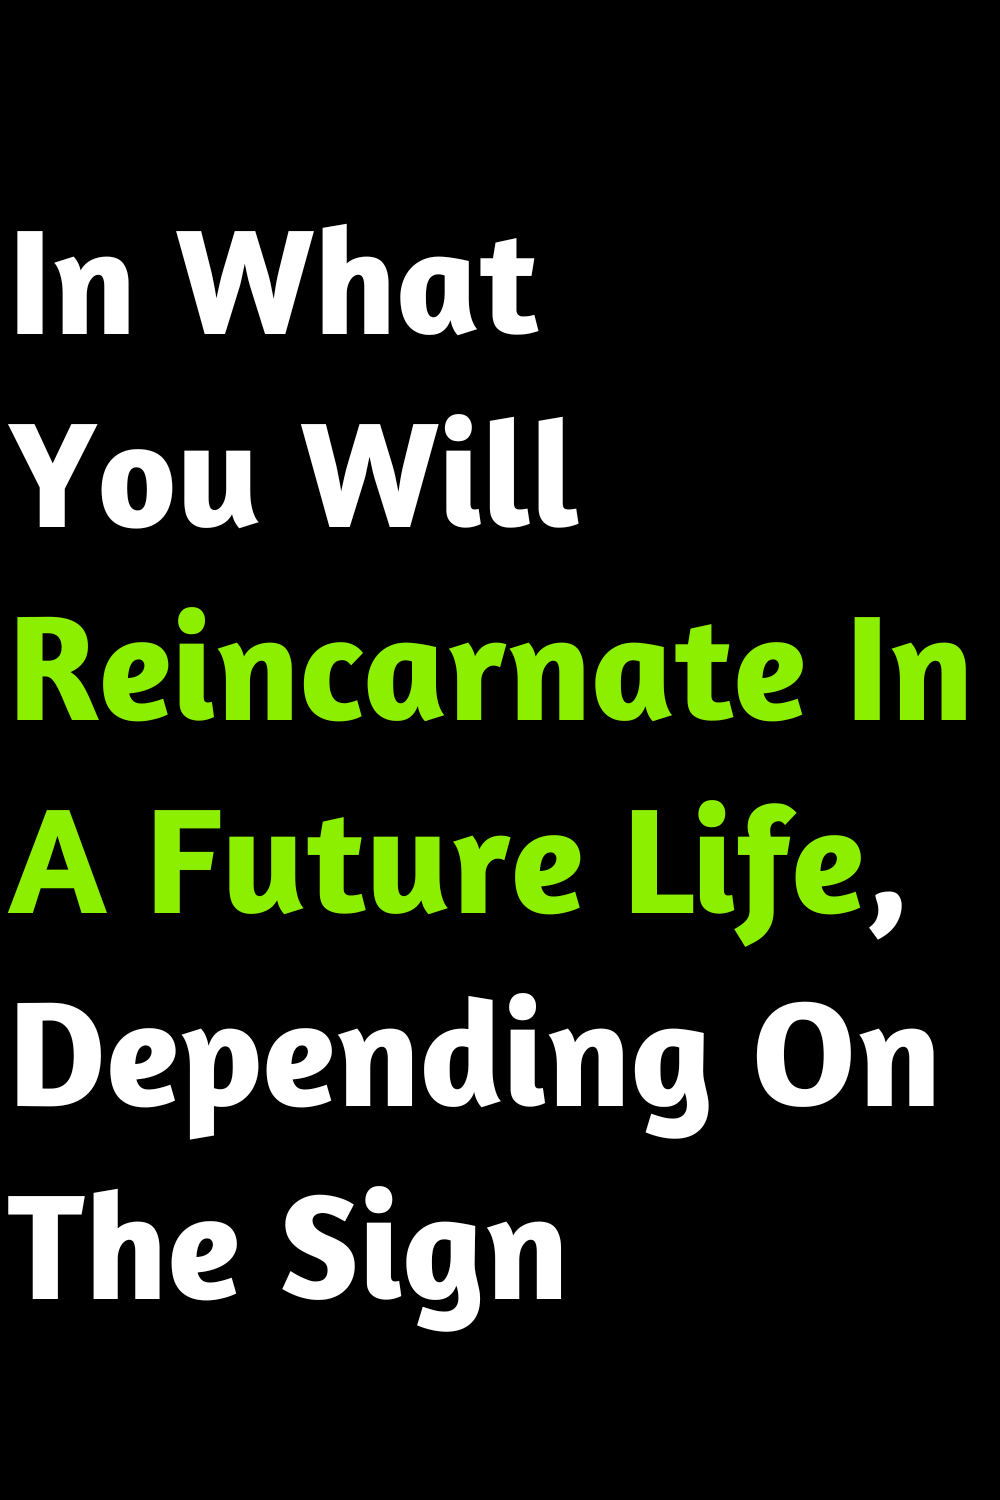 In What You Will Reincarnate In A Future Life, Depending On The Sign